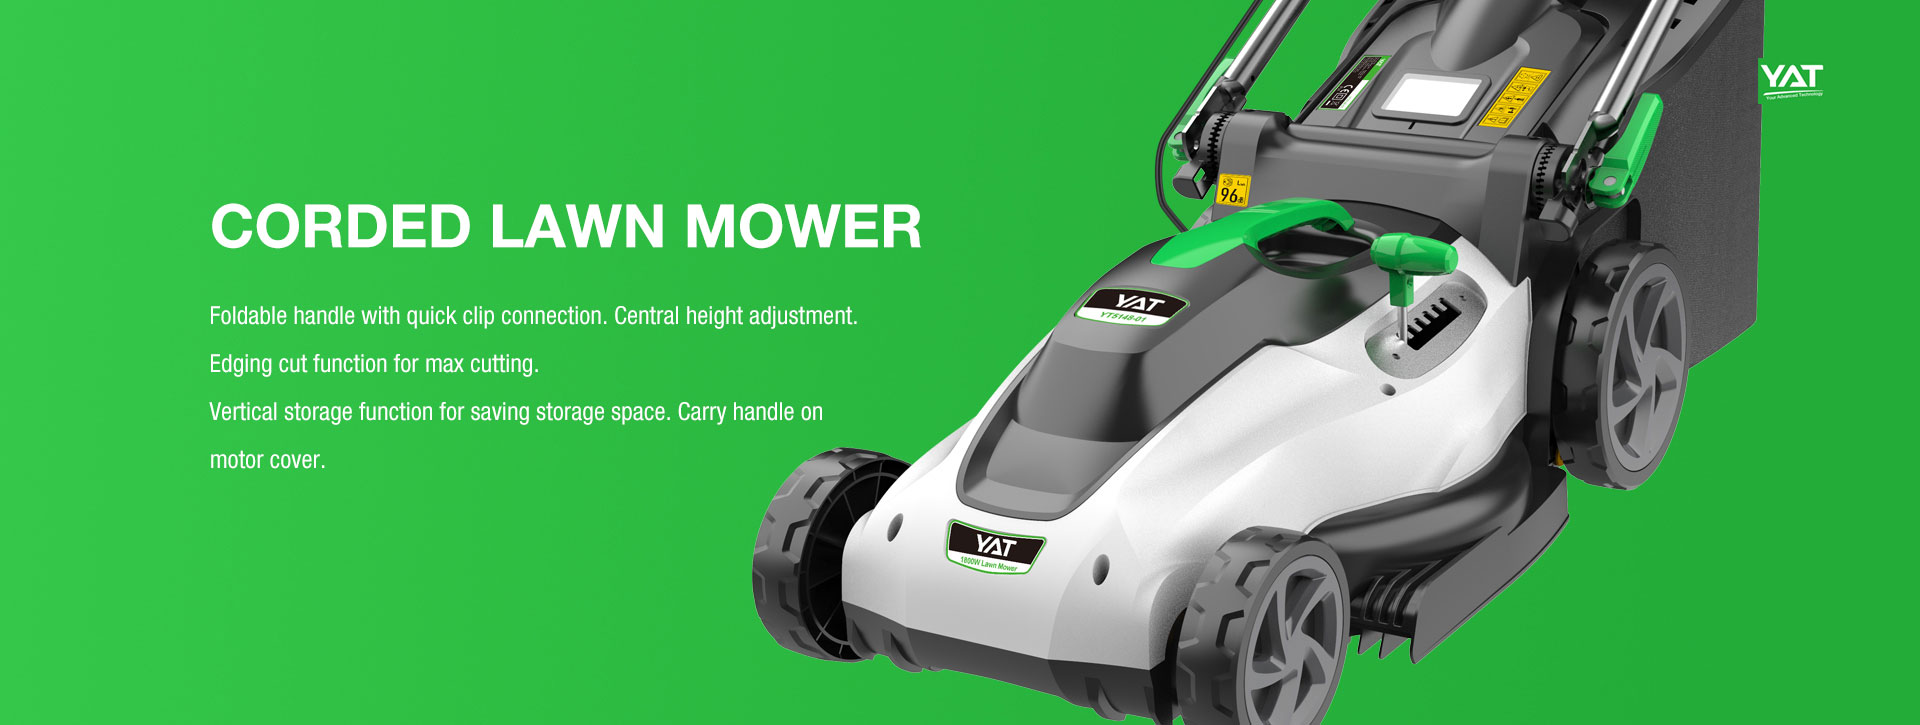 COMPACT LAWN MOWER